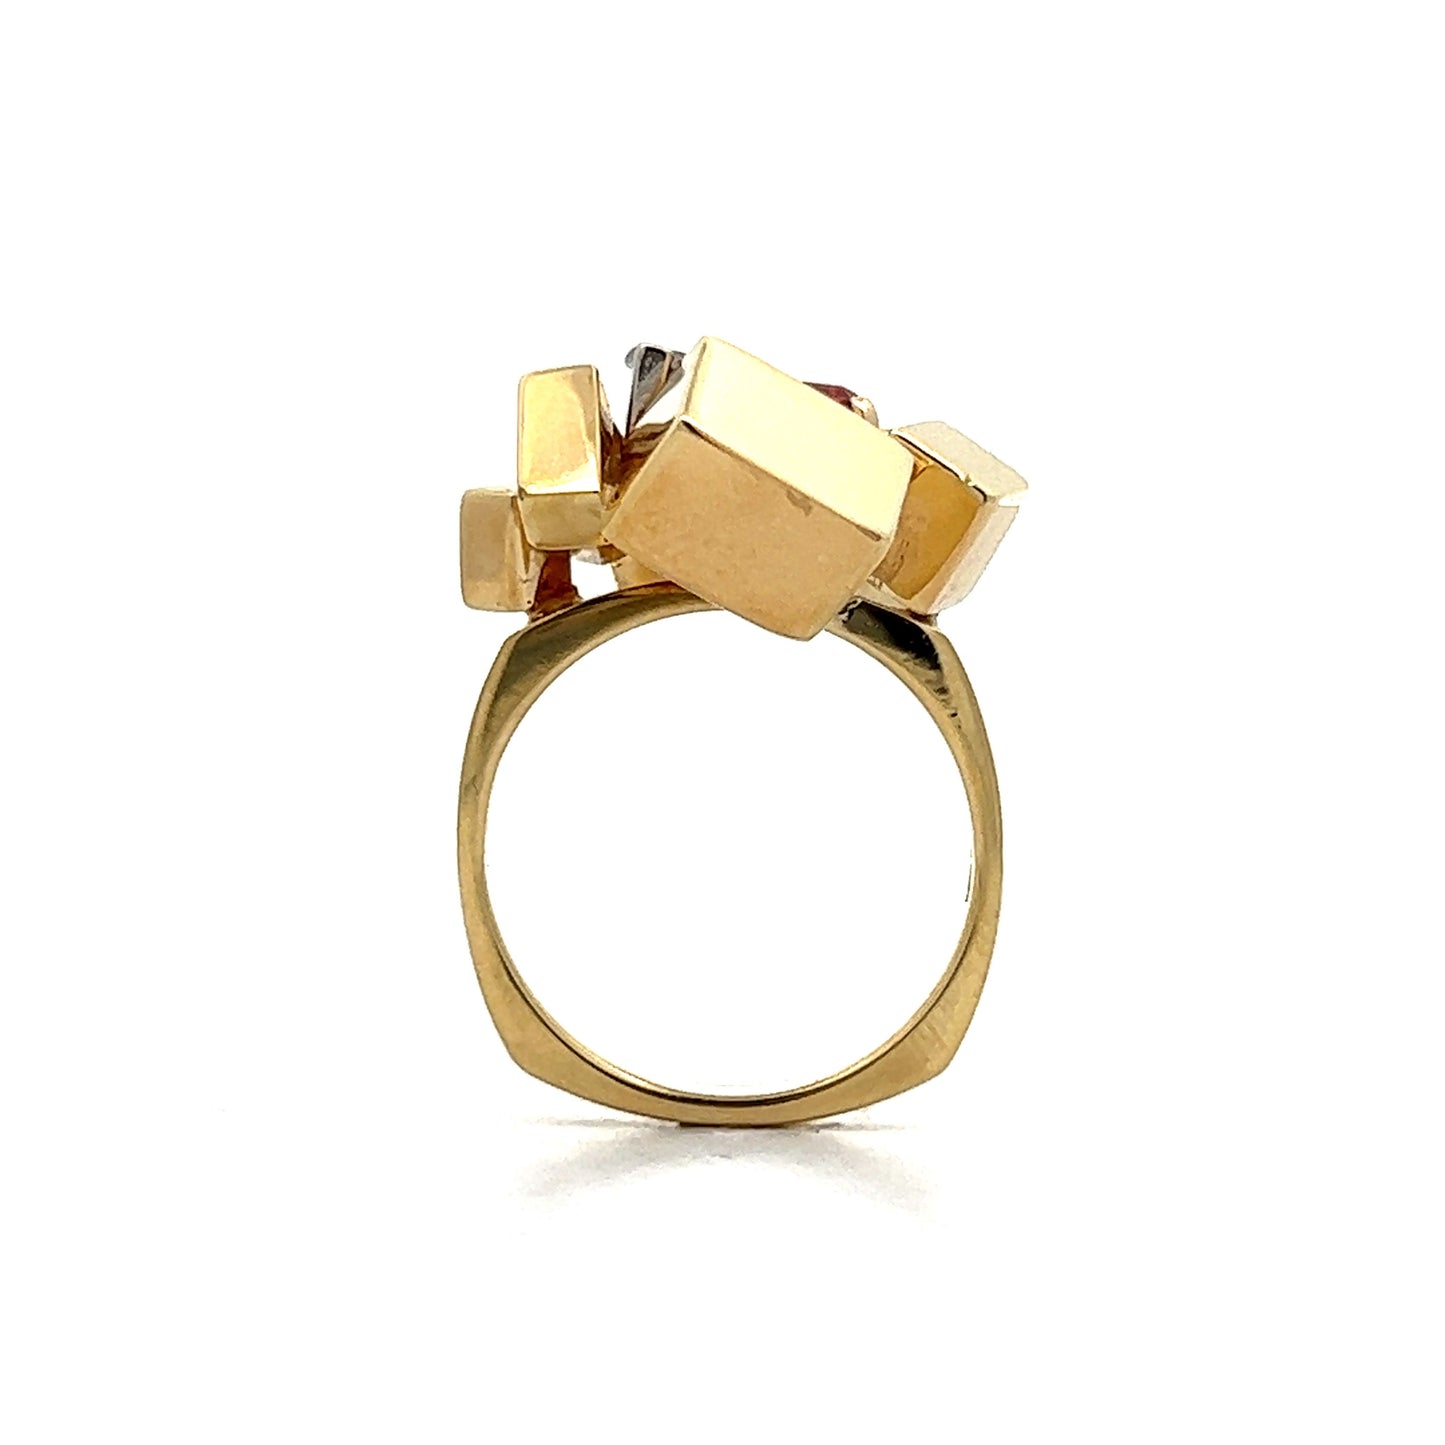 Alfred Karram Cocktail Ring in 18k Yellow Gold